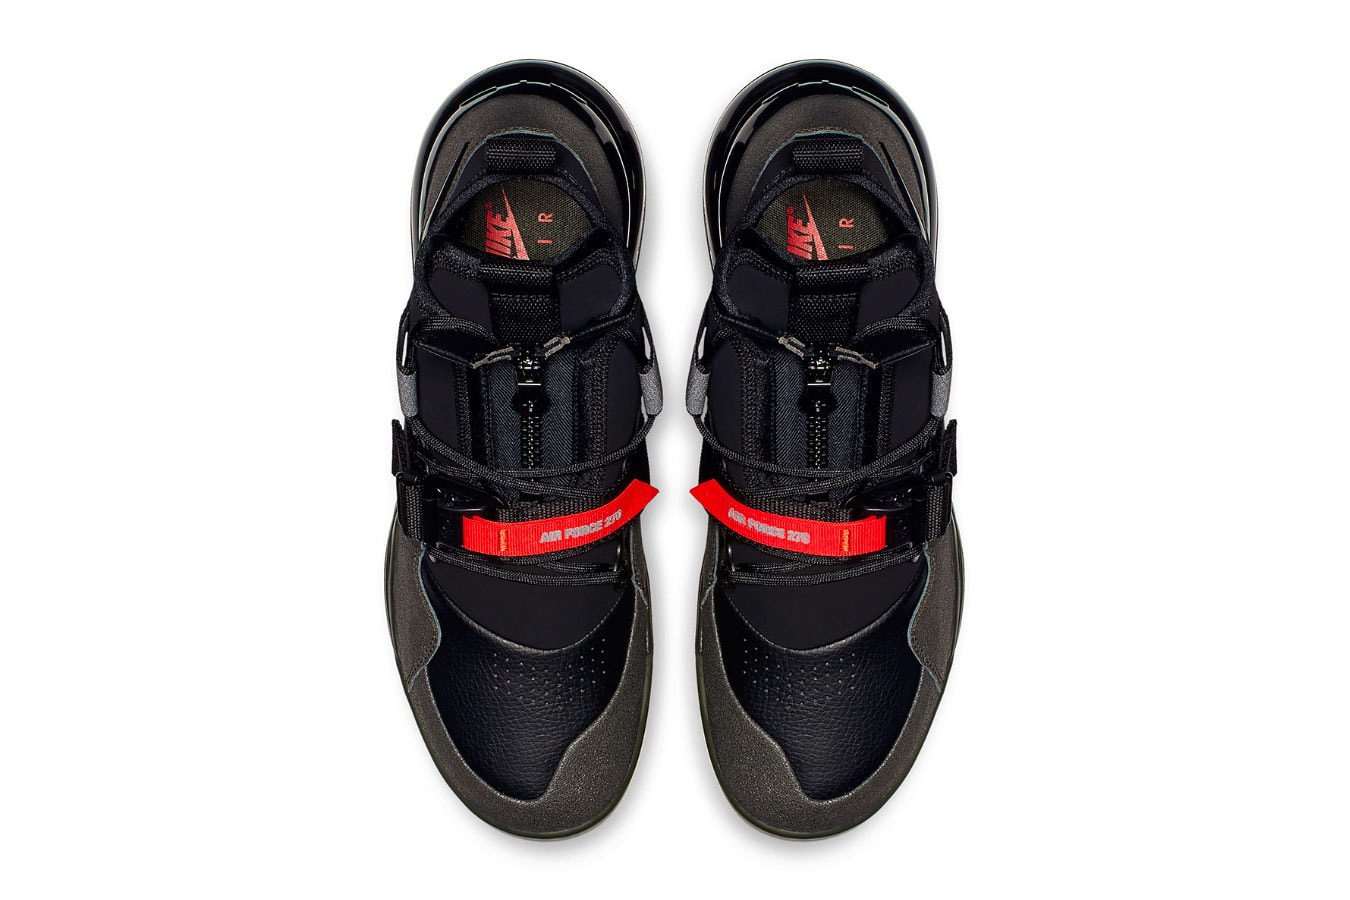 Nike Air Force 270 Utility "Sequoia/Habanero Red" release date info sneaker colorway november 2018 price black red